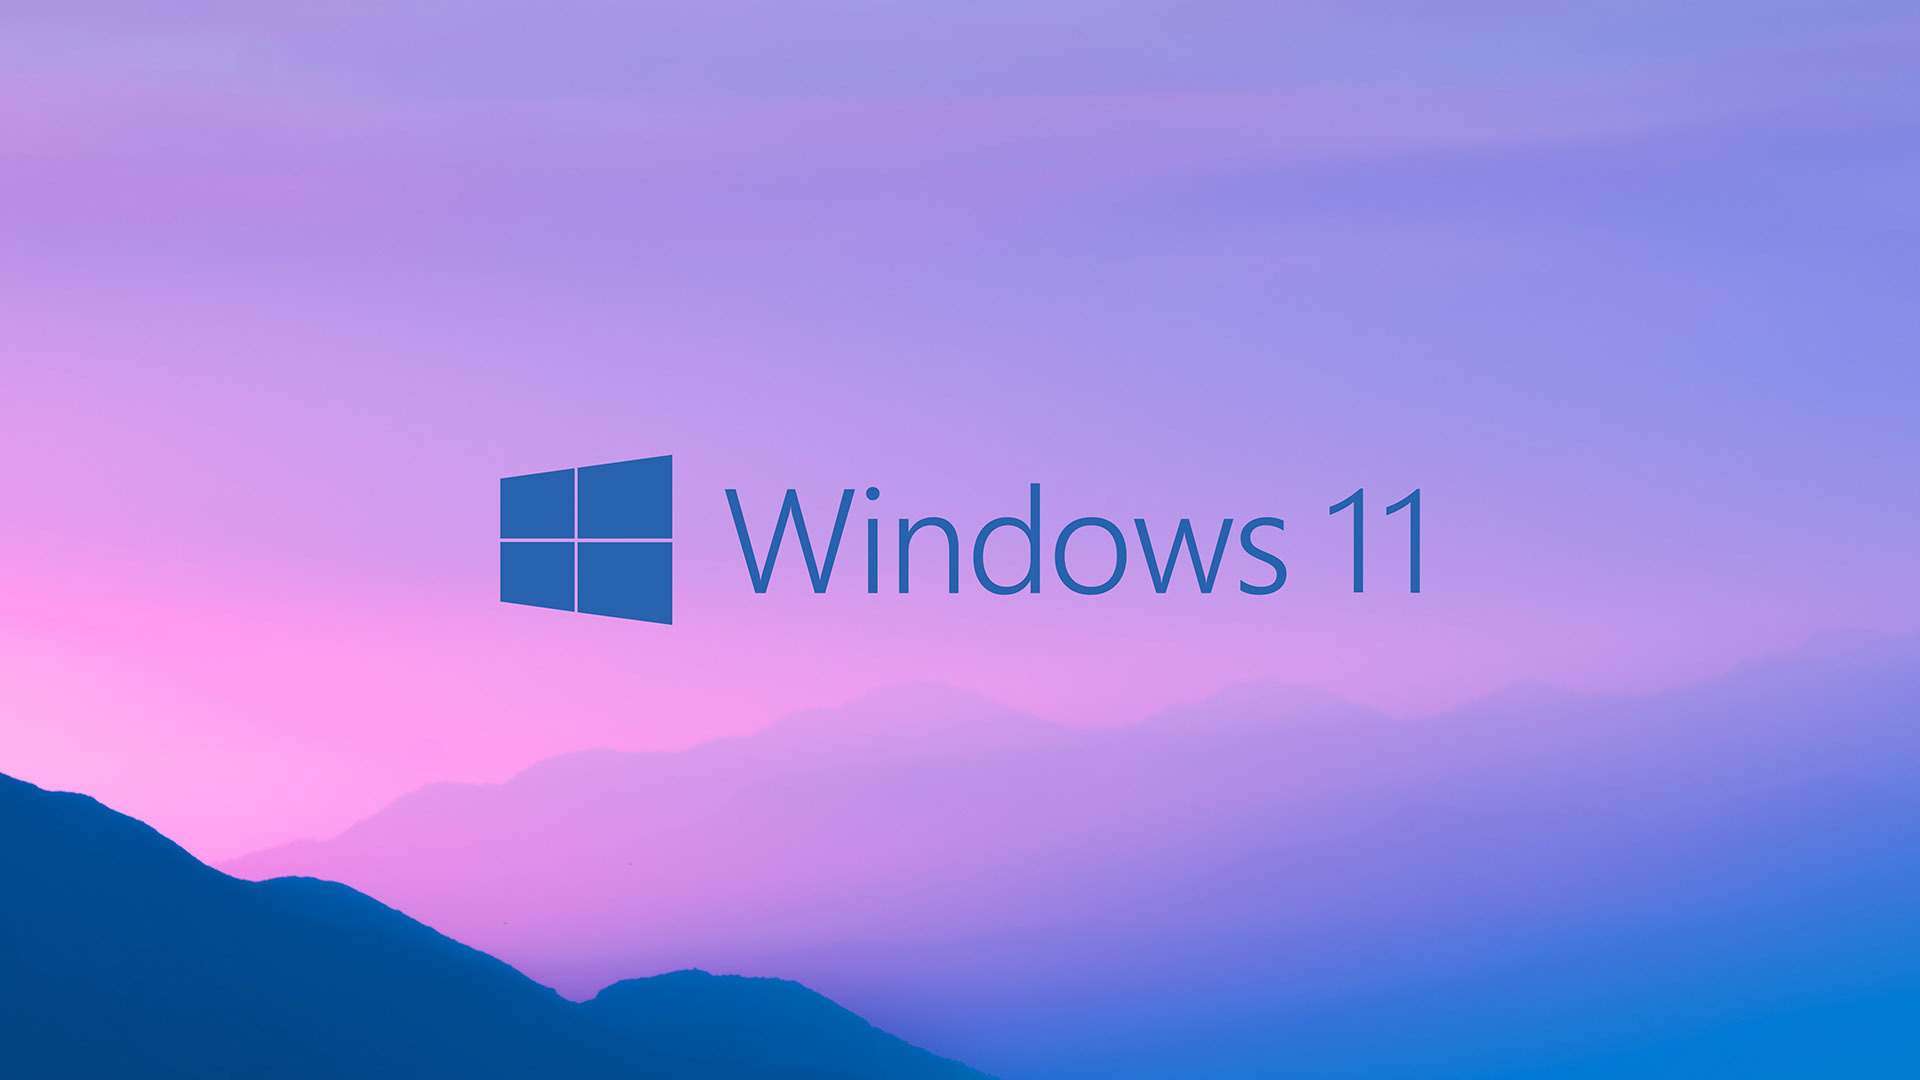  Windows 11 HQ Background Wallpapers